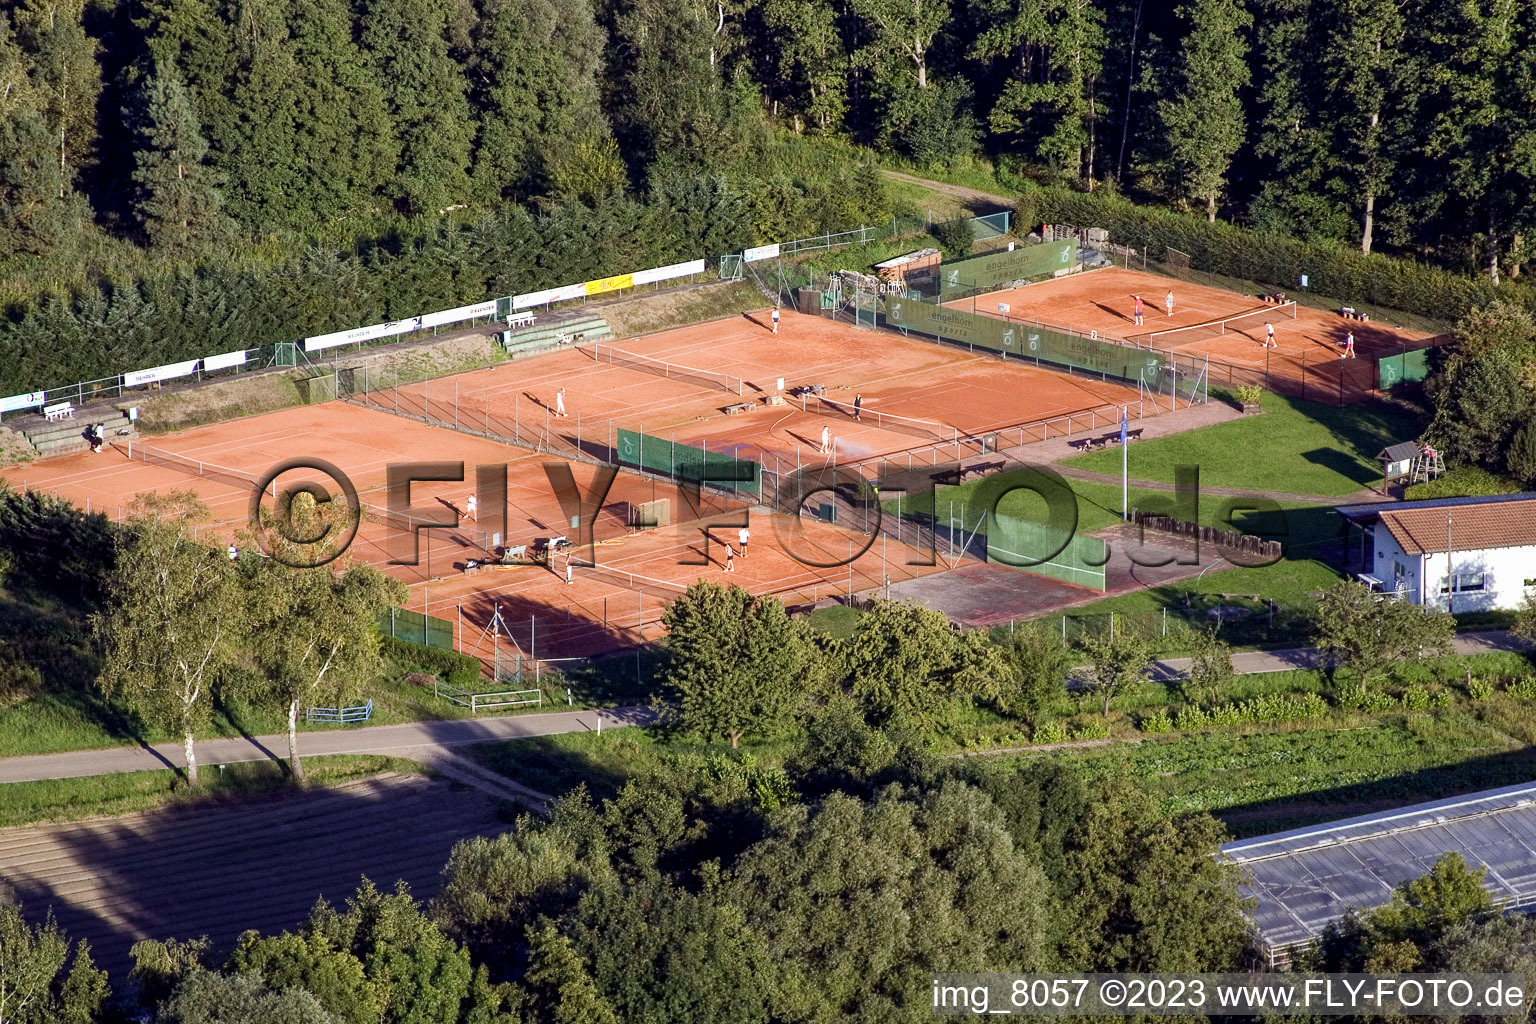 Tennis club in Steinfeld in the state Rhineland-Palatinate, Germany